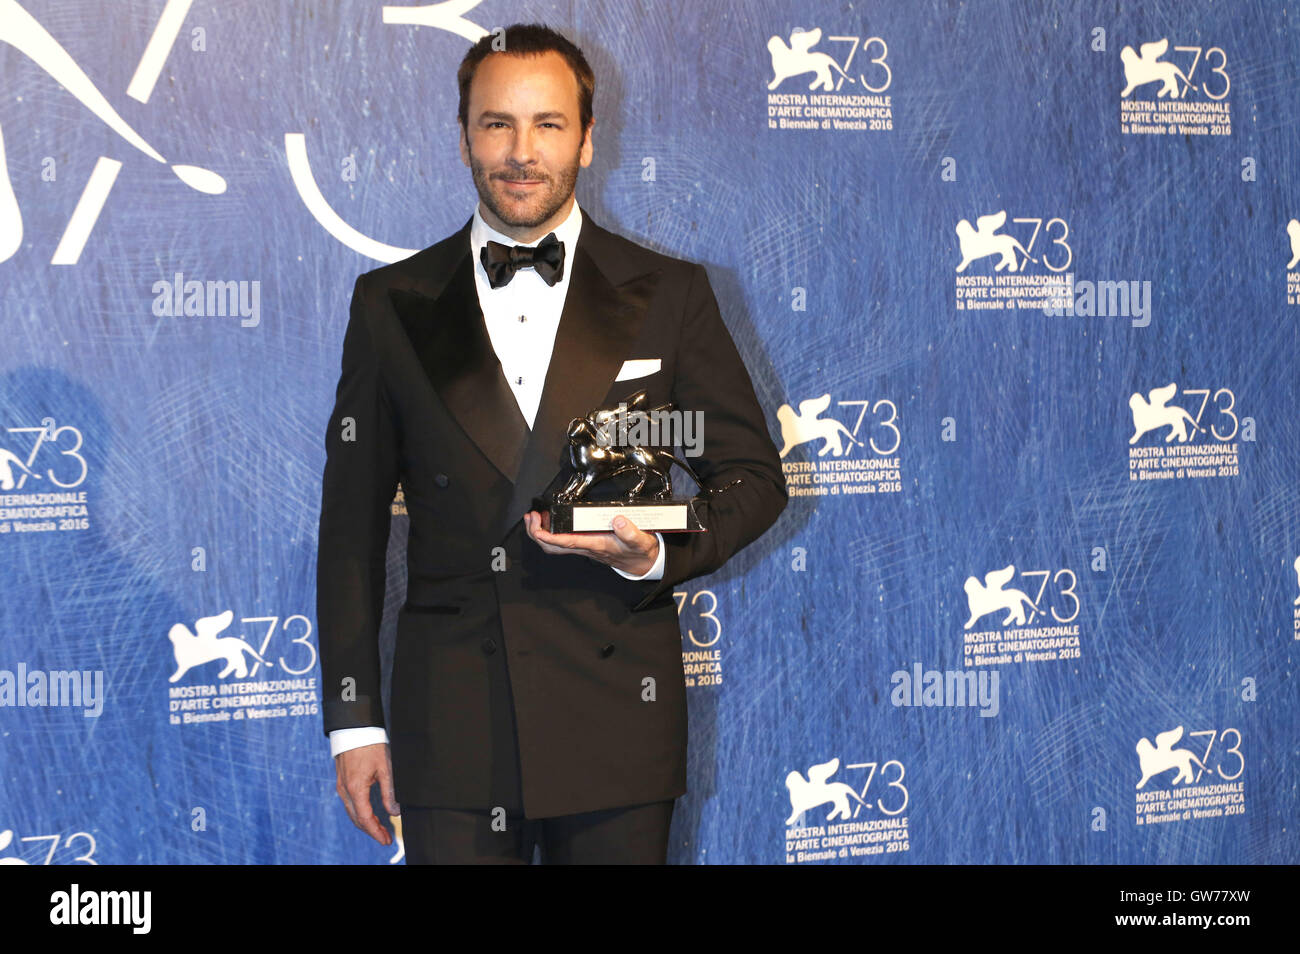 Director Tom Ford wins Silver Lion Grand Jury Prize for the movie  'Nocturnal Animals' at the award ceremony at the 73rd Venice International  Film Festival on September 10, 2016 in Venice, Italy. |